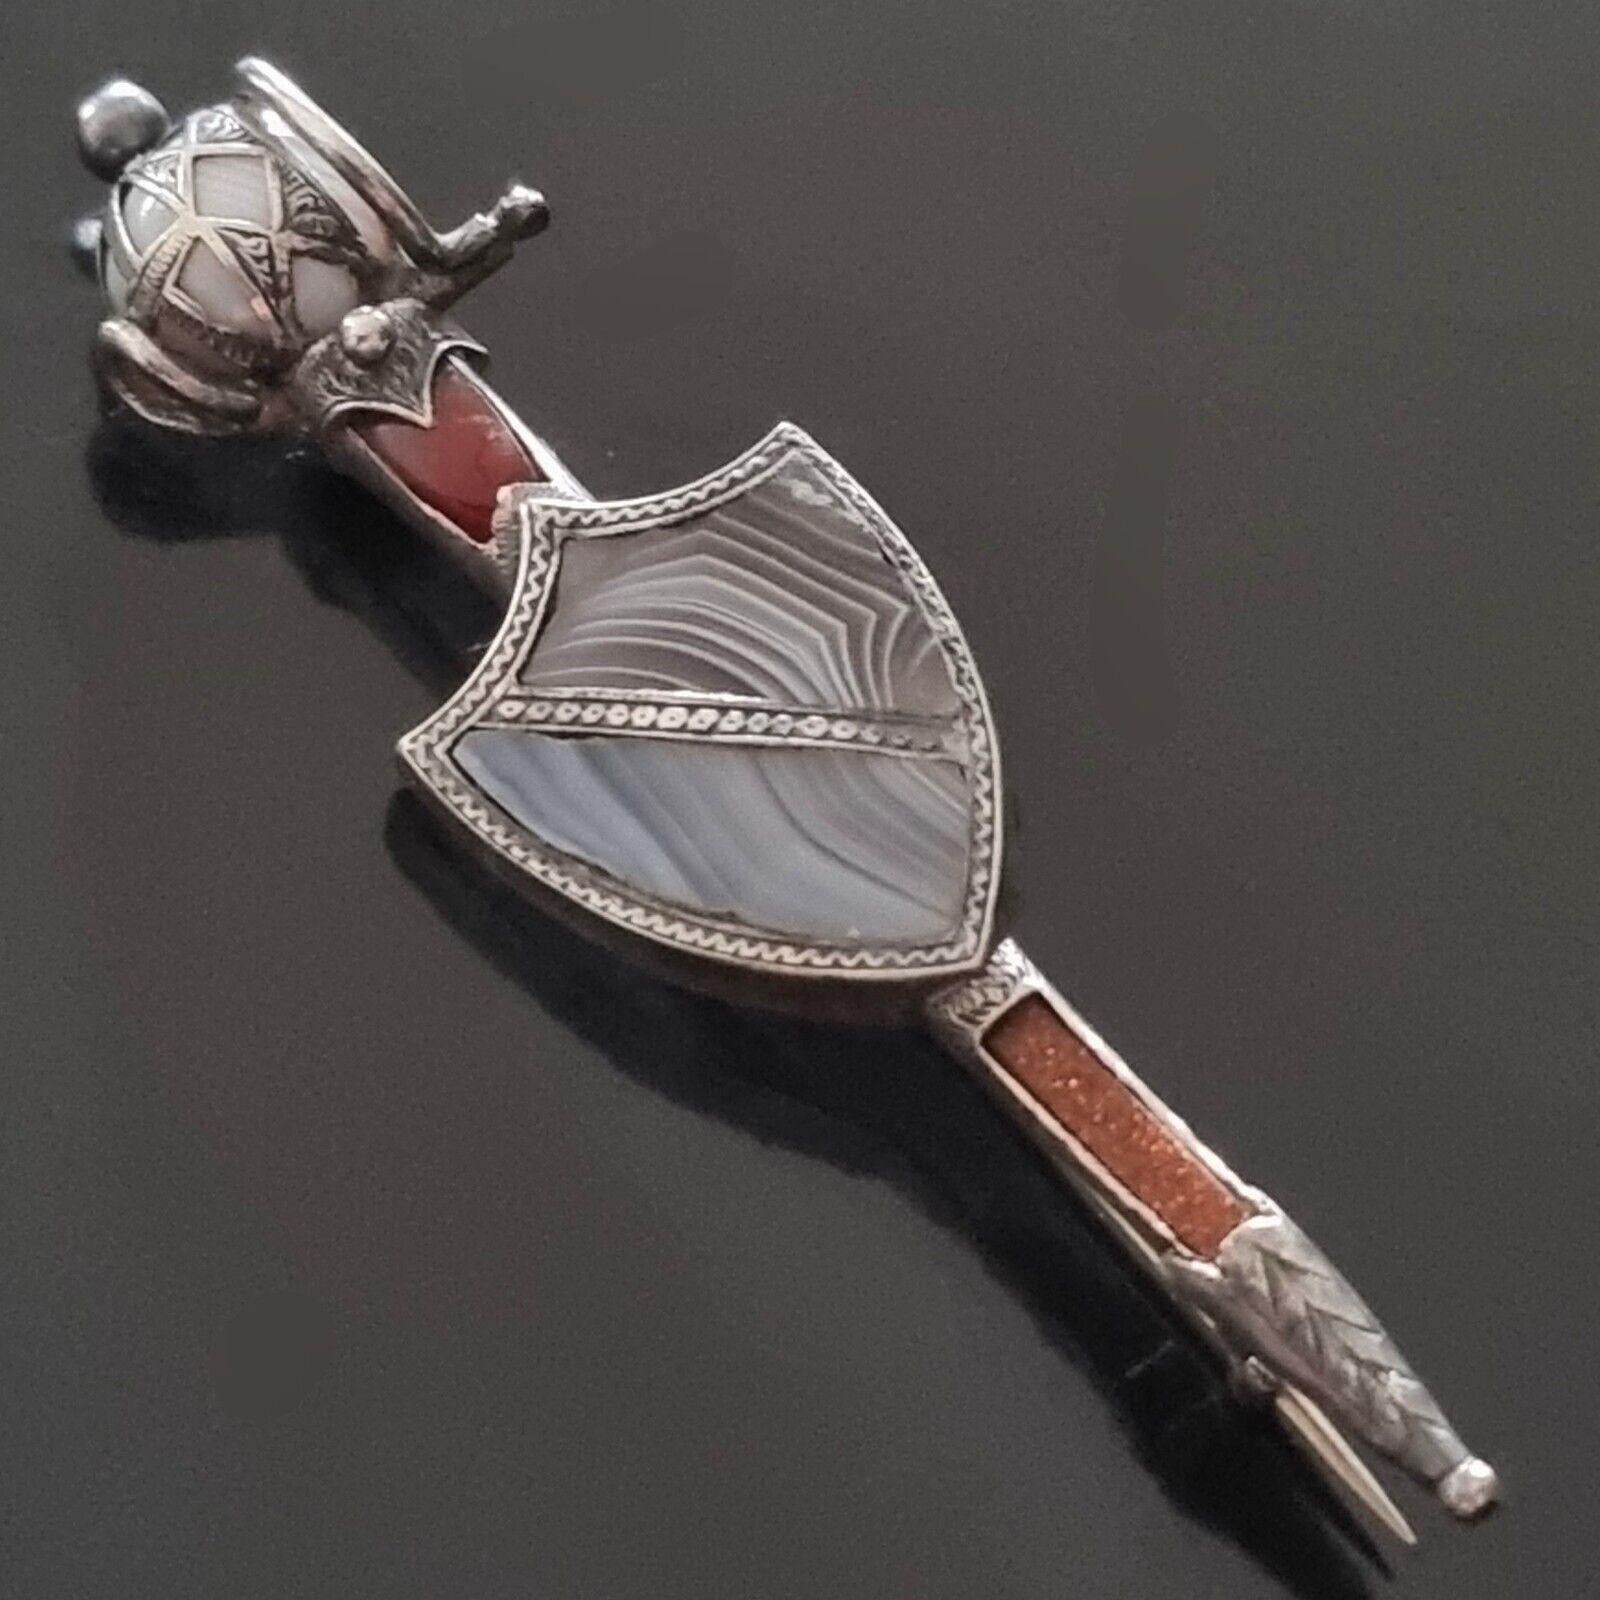 Antique Scottish SWORD and SHIELD BROOCH in Silver,
Victorian Scottish silver brooch,
19th century natural stones,
collector's item, rare,
maker's marks of the time,
dimensions 8 x 2 cm, weight 9.9 g,
example: similar item sold on 1stDIBS (see last